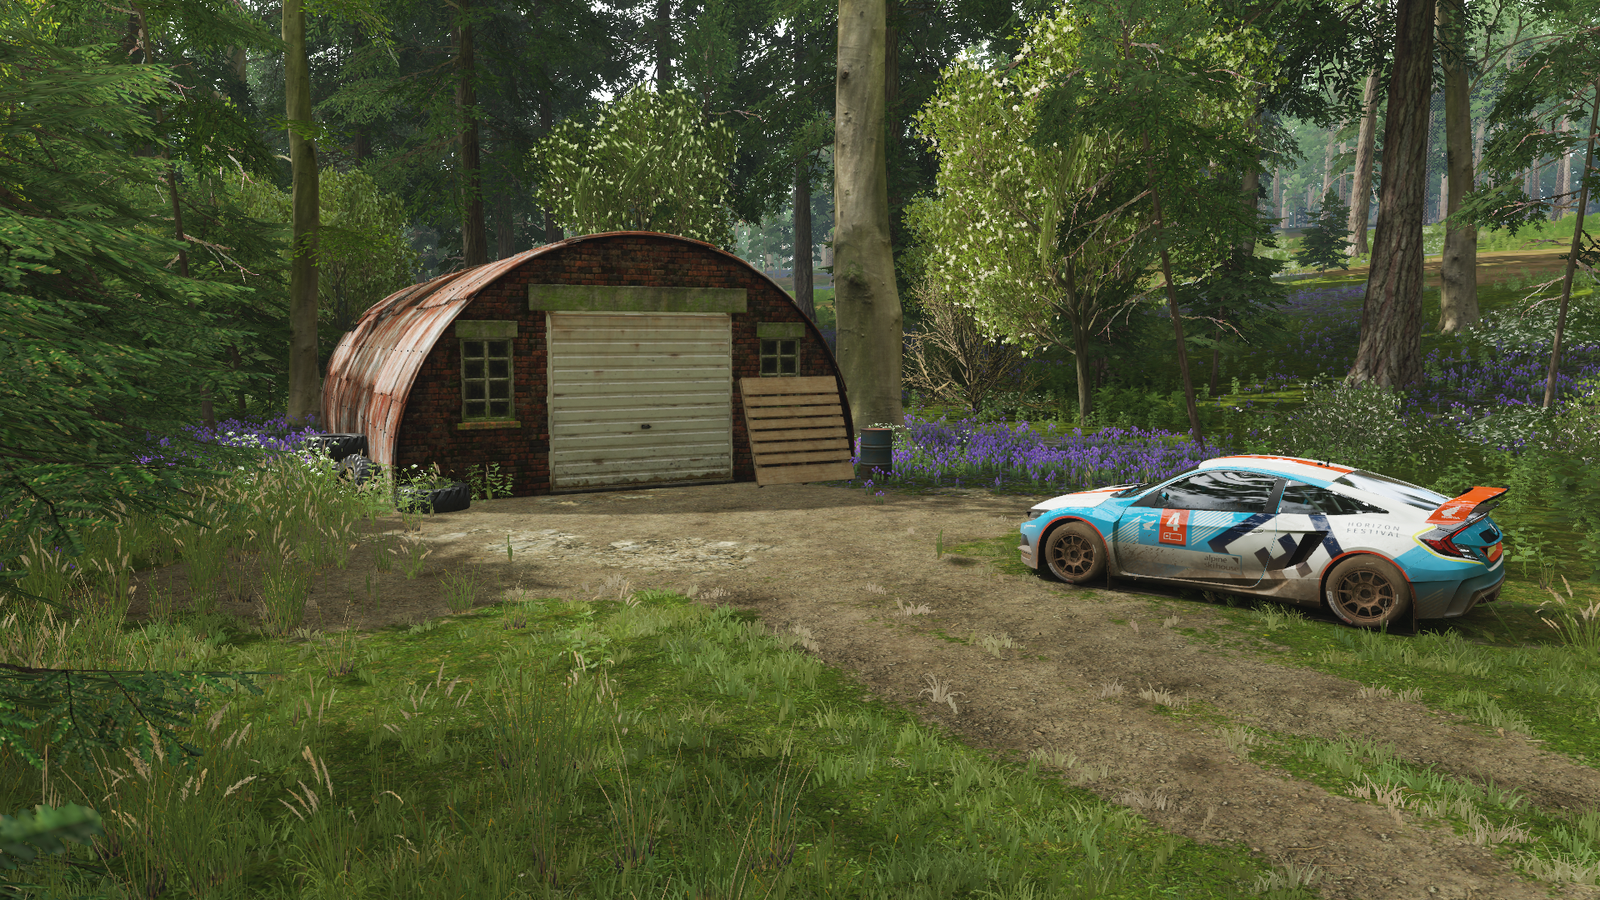 Forza Horizon 4 All Barn Finds Guide